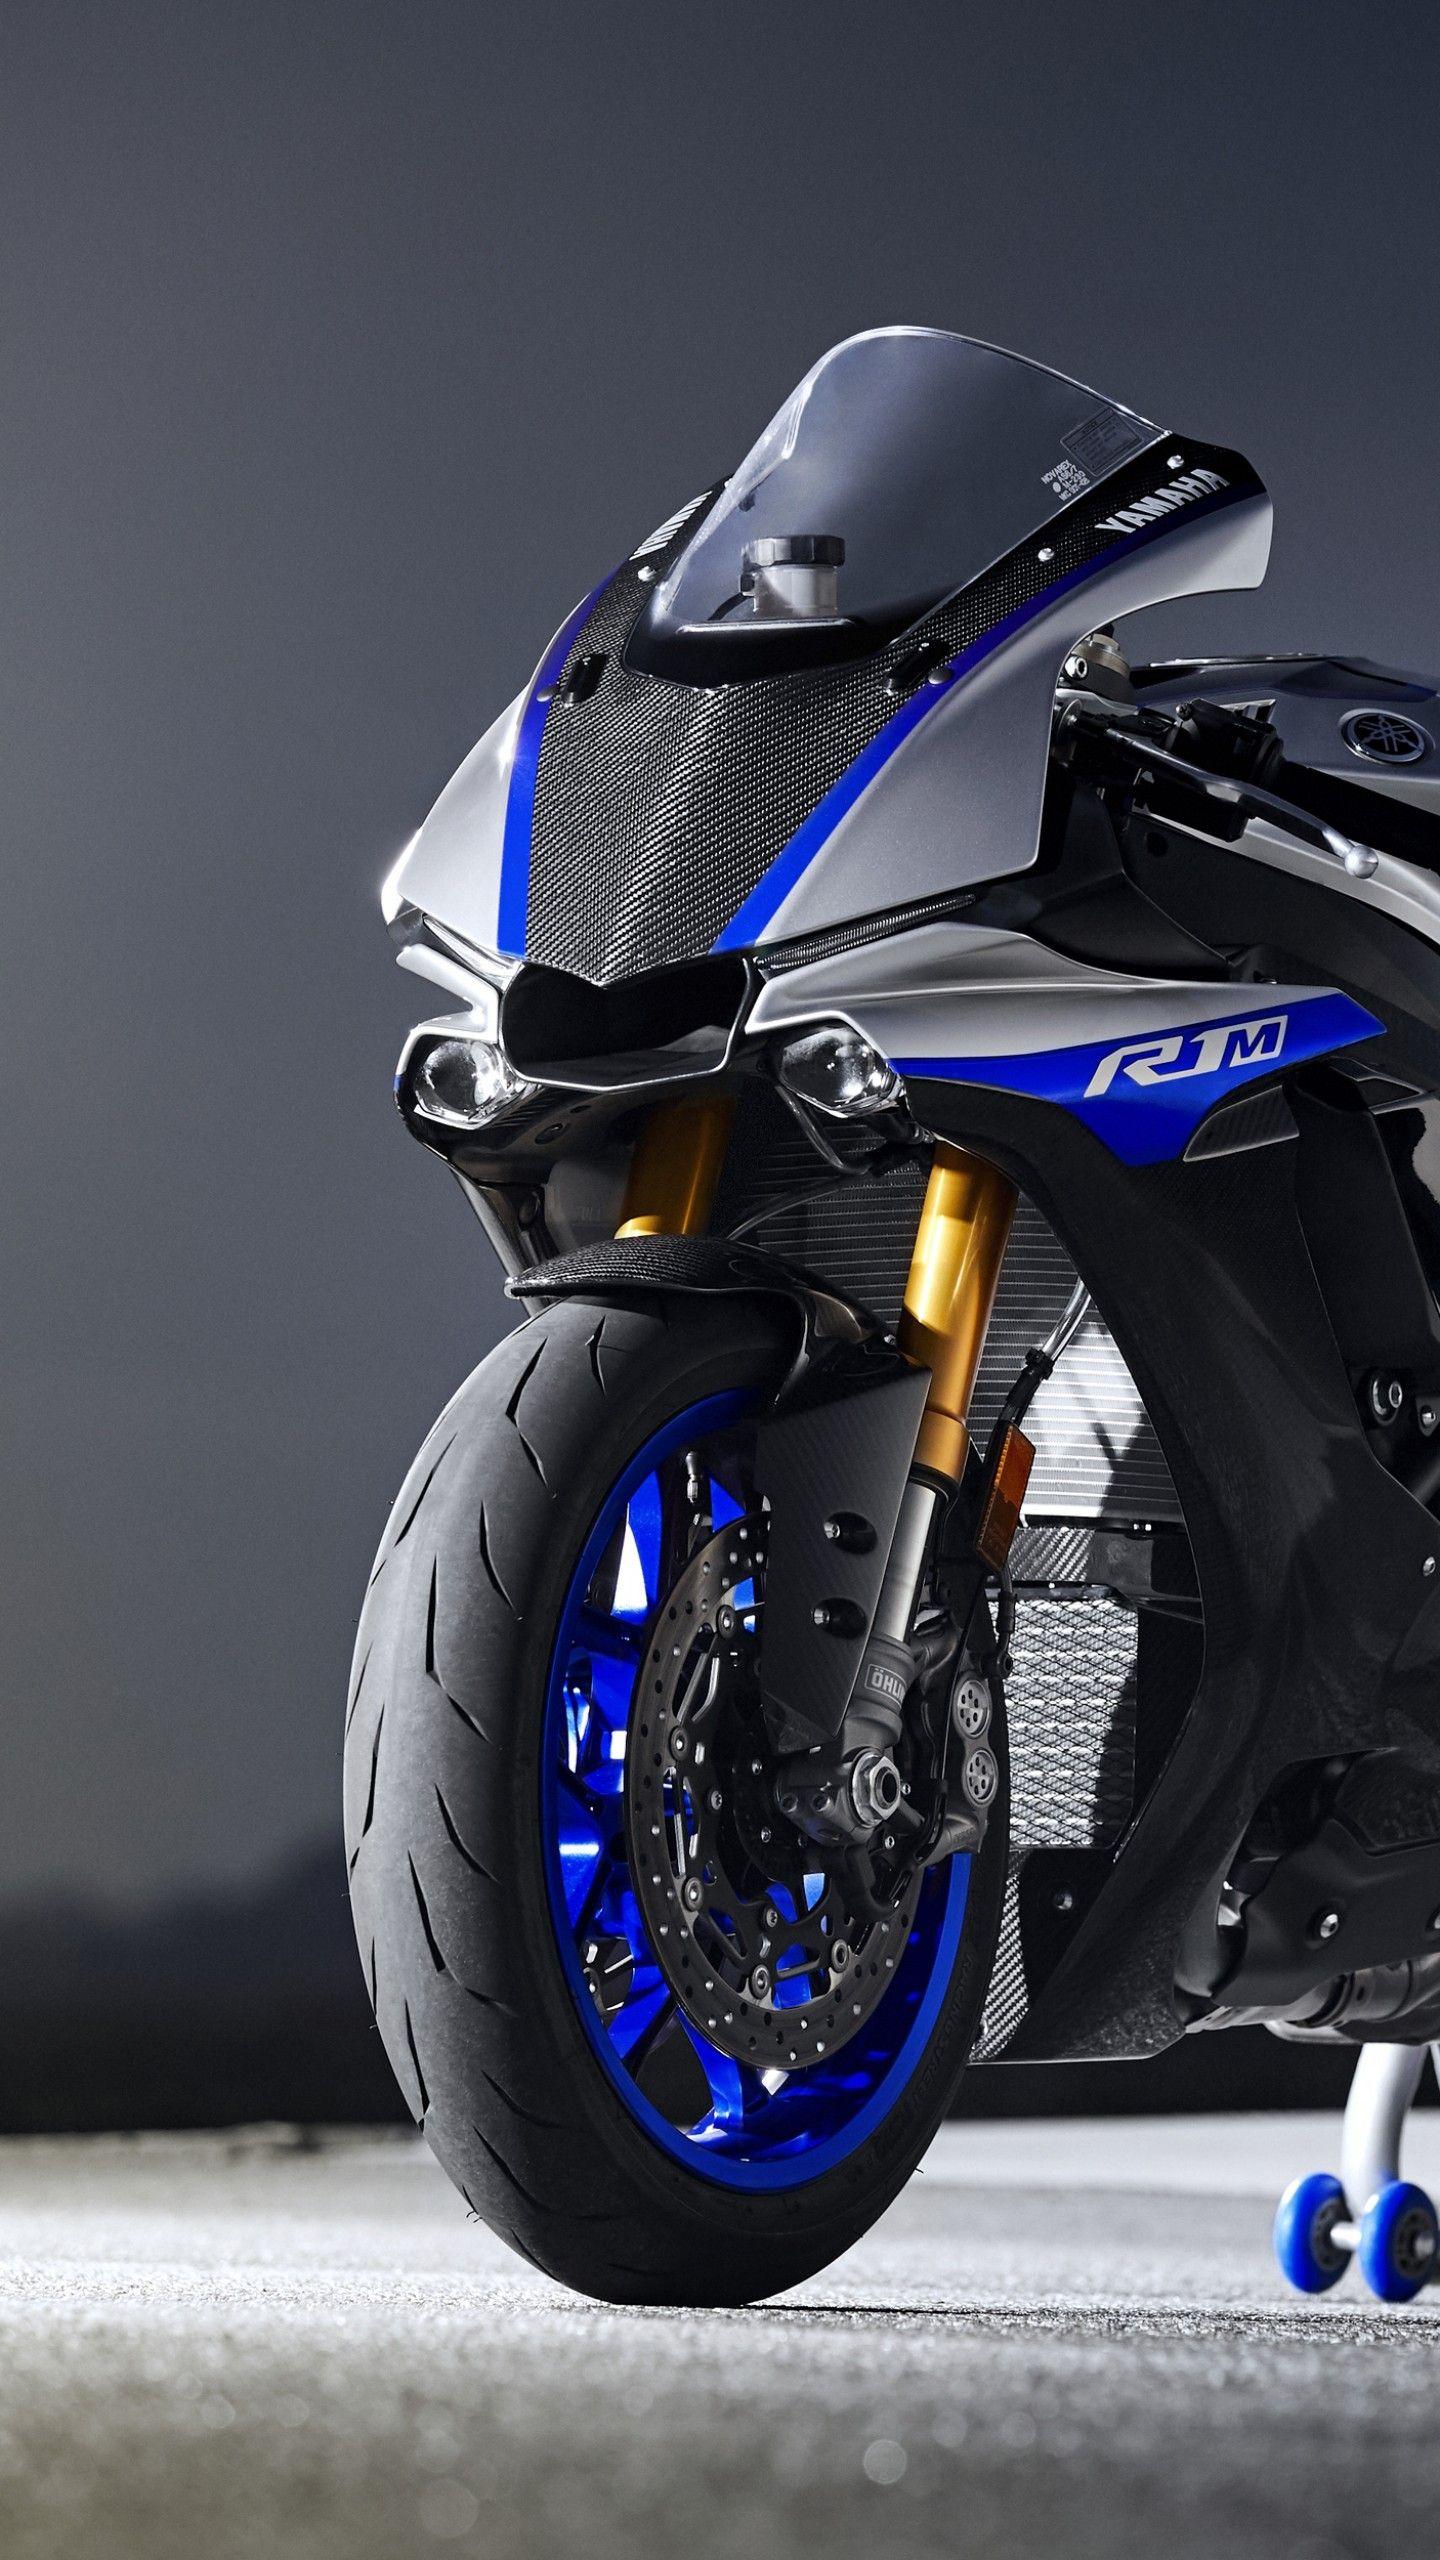 Yamaha YZF-R1M Wallpapers - Top Free Yamaha YZF-R1M Backgrounds